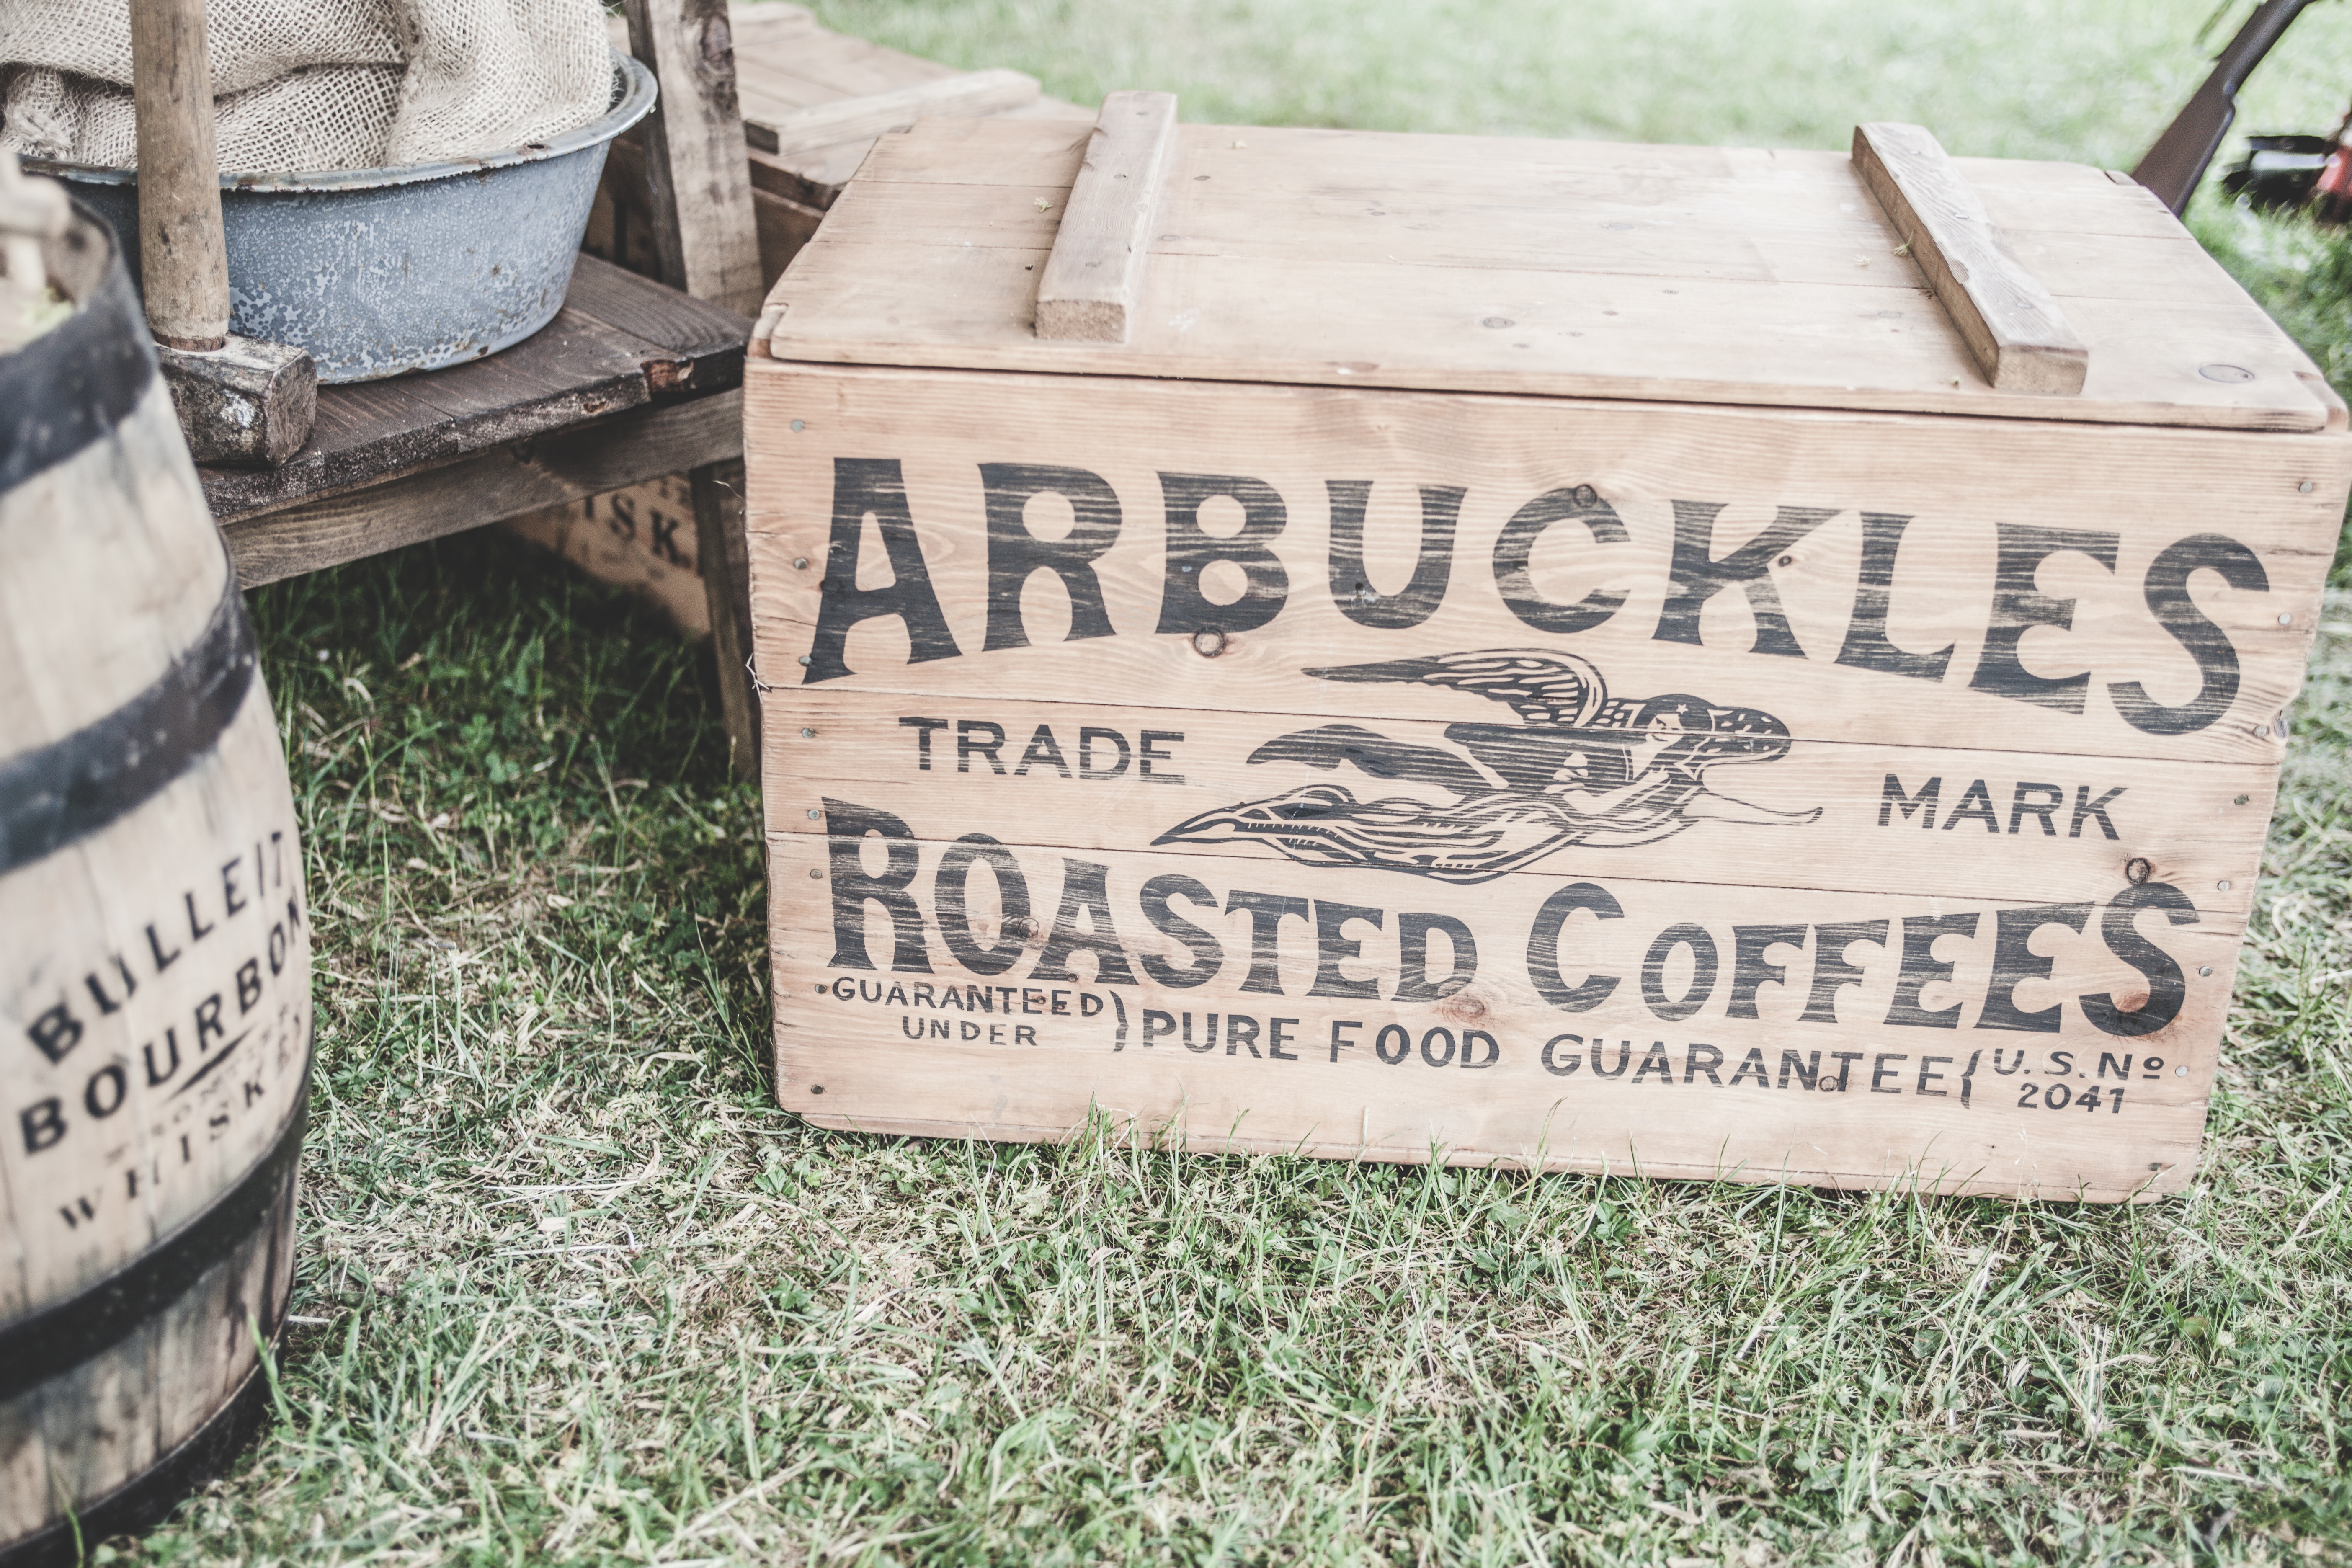 arbuckles trade mark roasted coffees box on green grass field